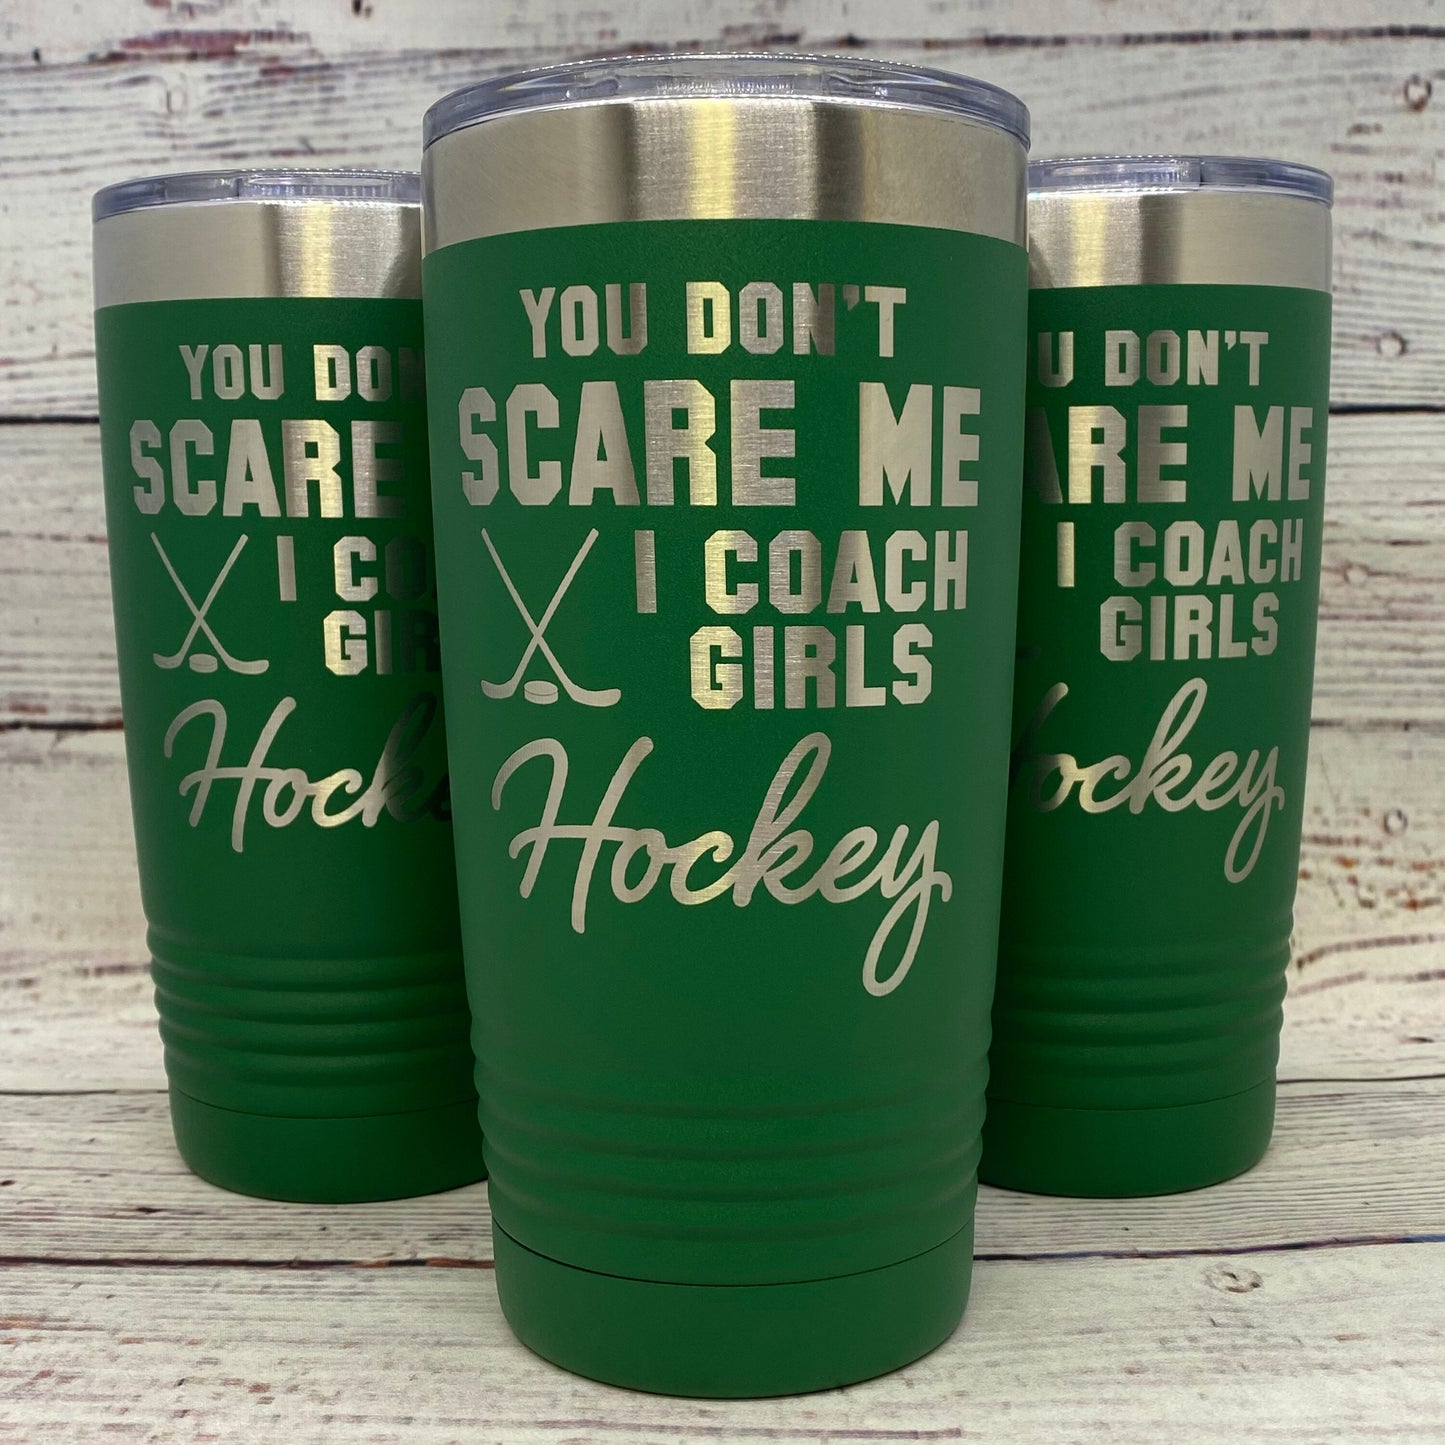 You Don't Scare Me I Coach Girls Hockey 20oz. Stainless Steel Tumbler